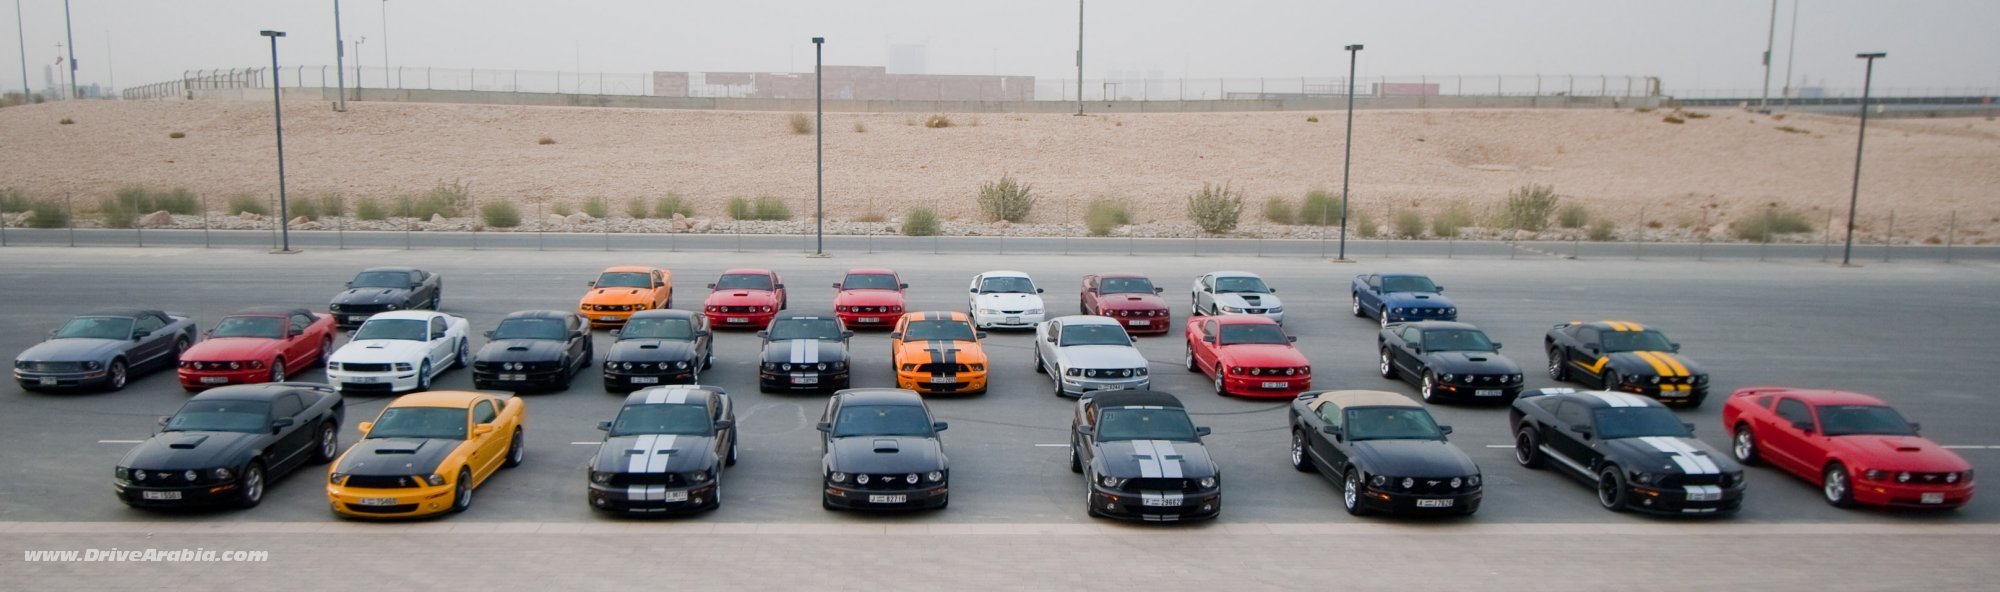 First drive: Ford Mustang 2010 UAE launch at Dubai Autodrome